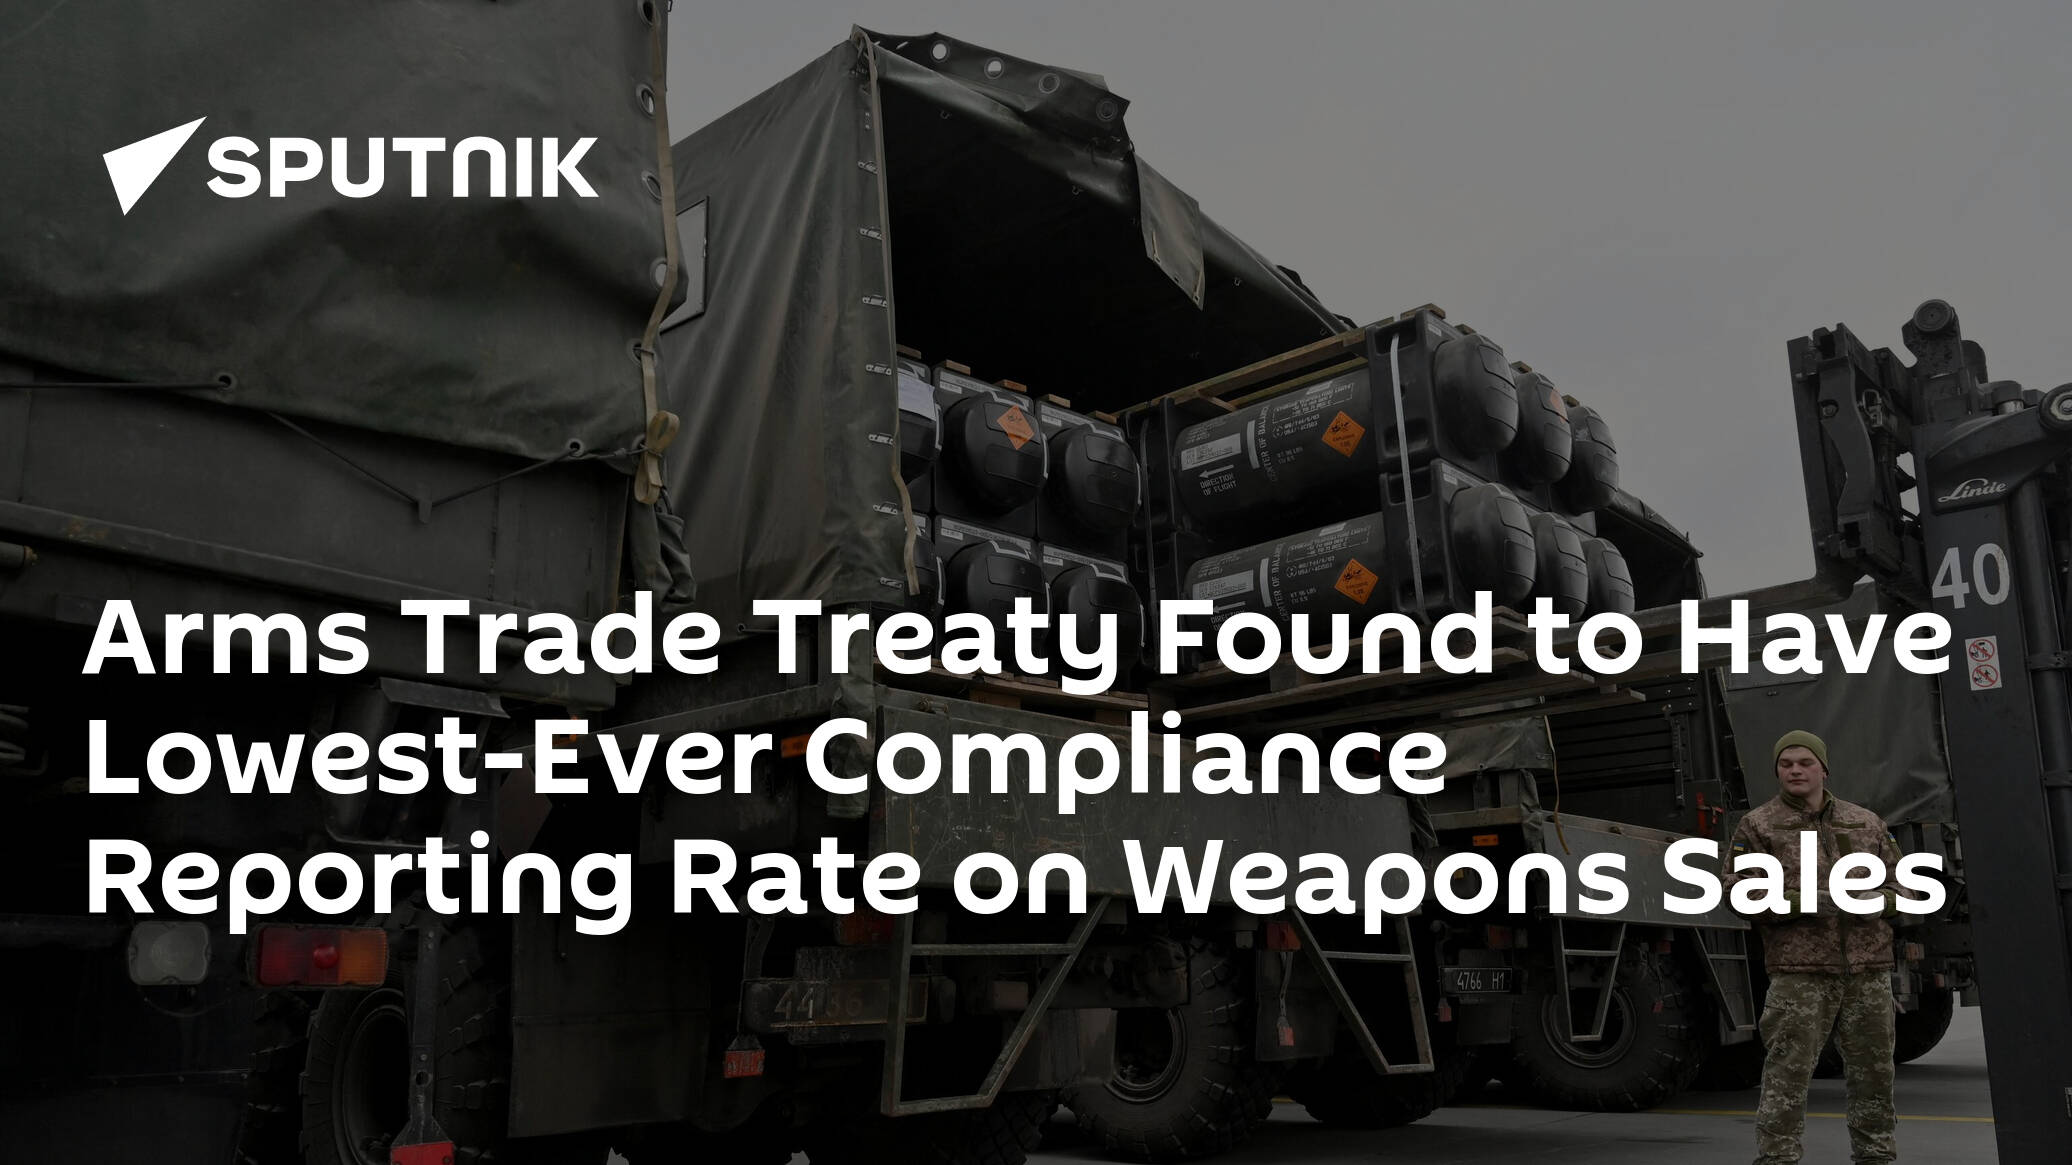 Arms Trade Treaty Found to Have Lowest-Ever Compliance Reporting Rate on Weapons Sales